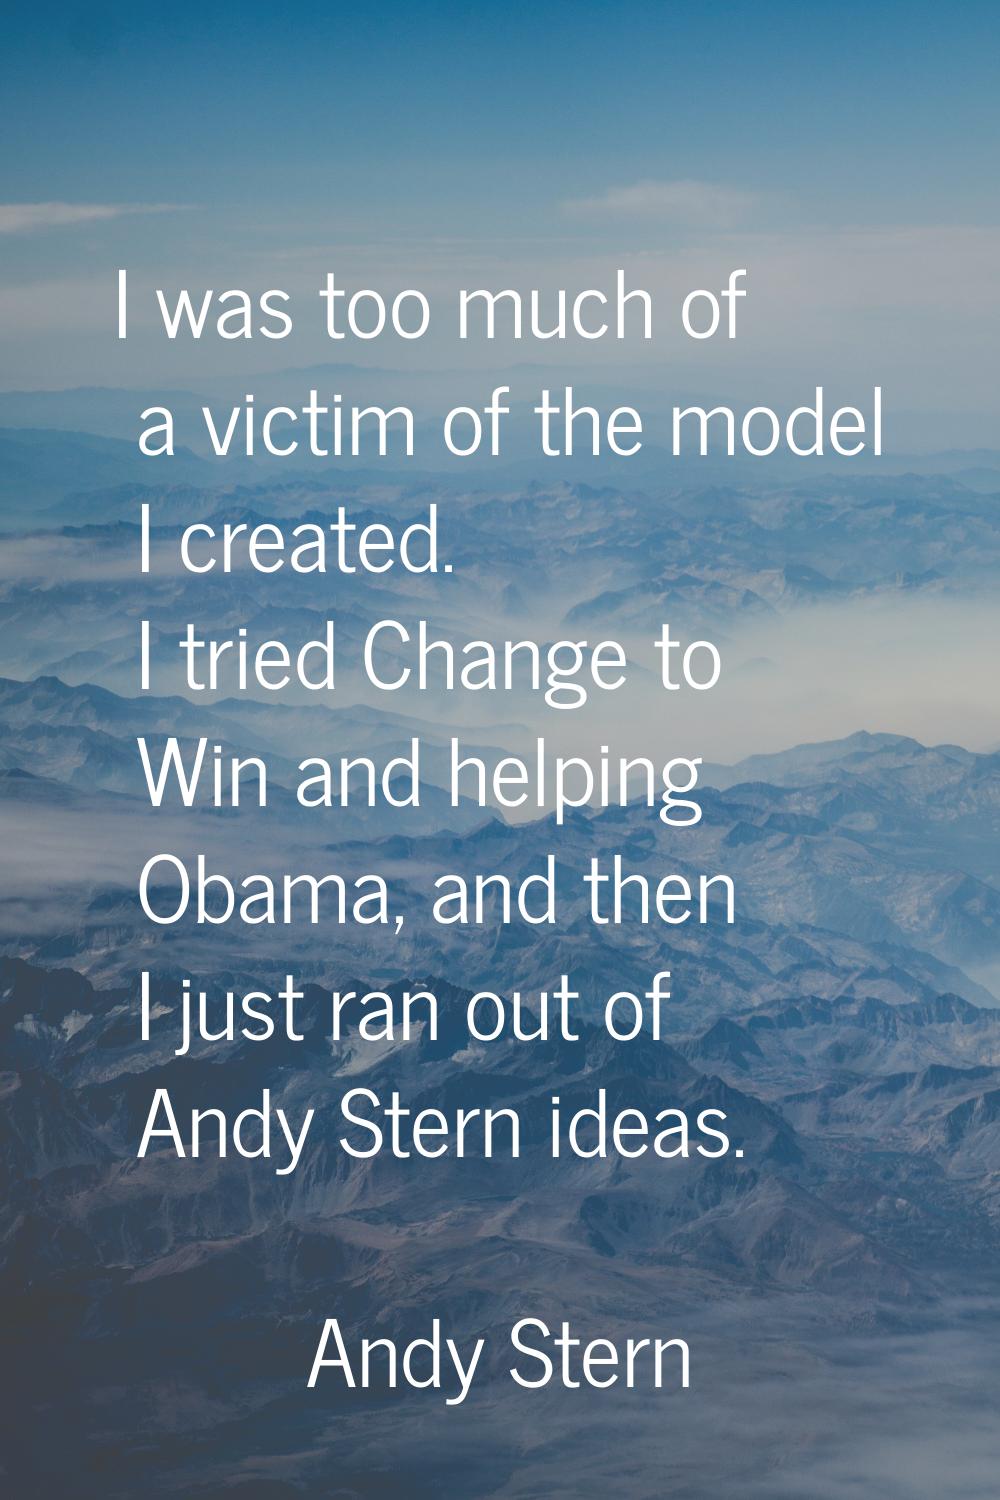 I was too much of a victim of the model I created. I tried Change to Win and helping Obama, and the